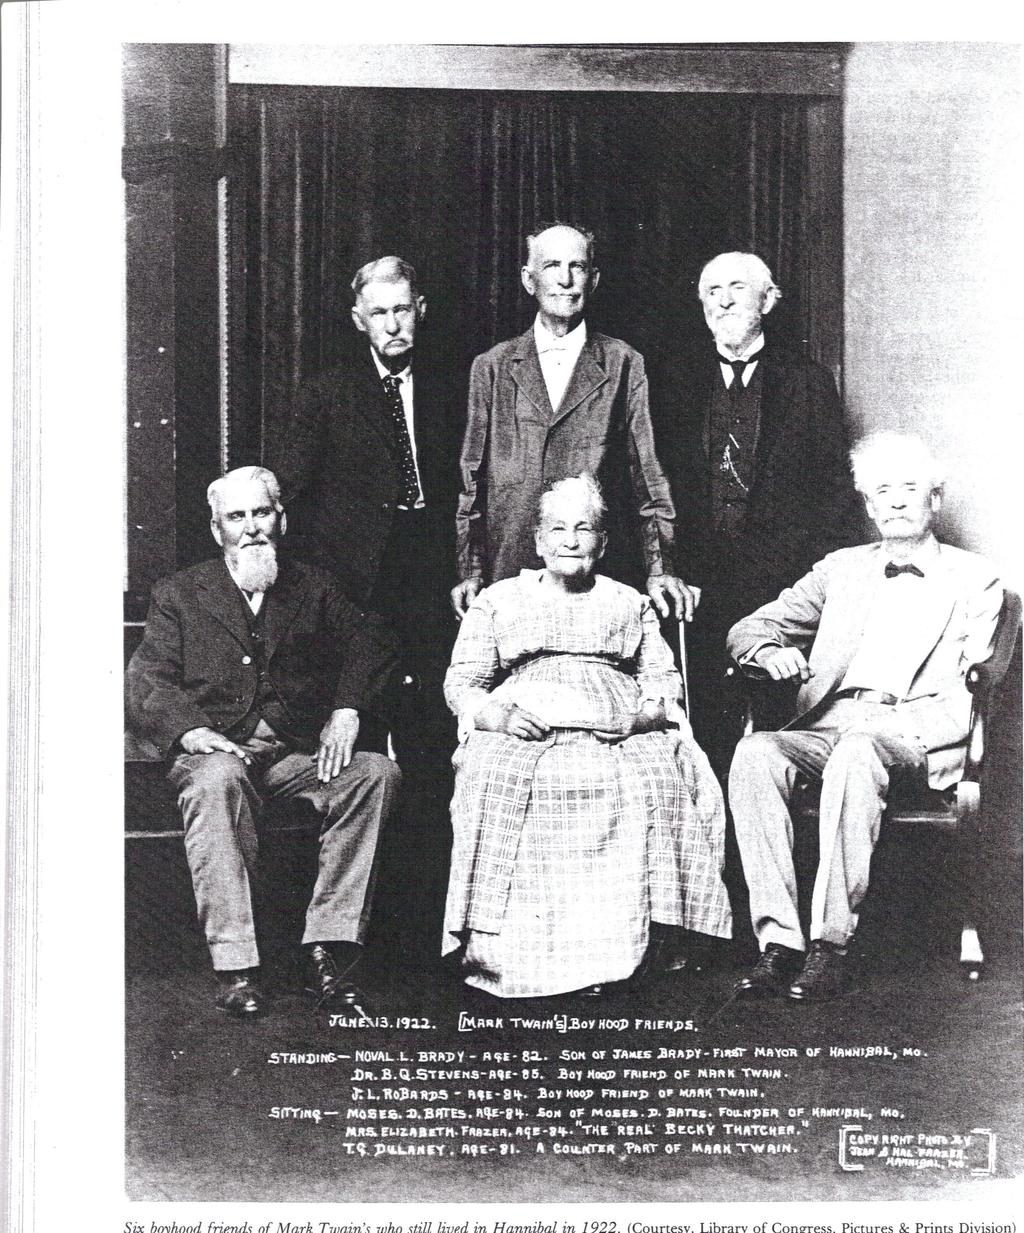 PAGE 8 V OLUME 48, N O. 2 Six boyhood friends of Mark Twain's who still lived in Hannibal in 1922, including Norval Brady.